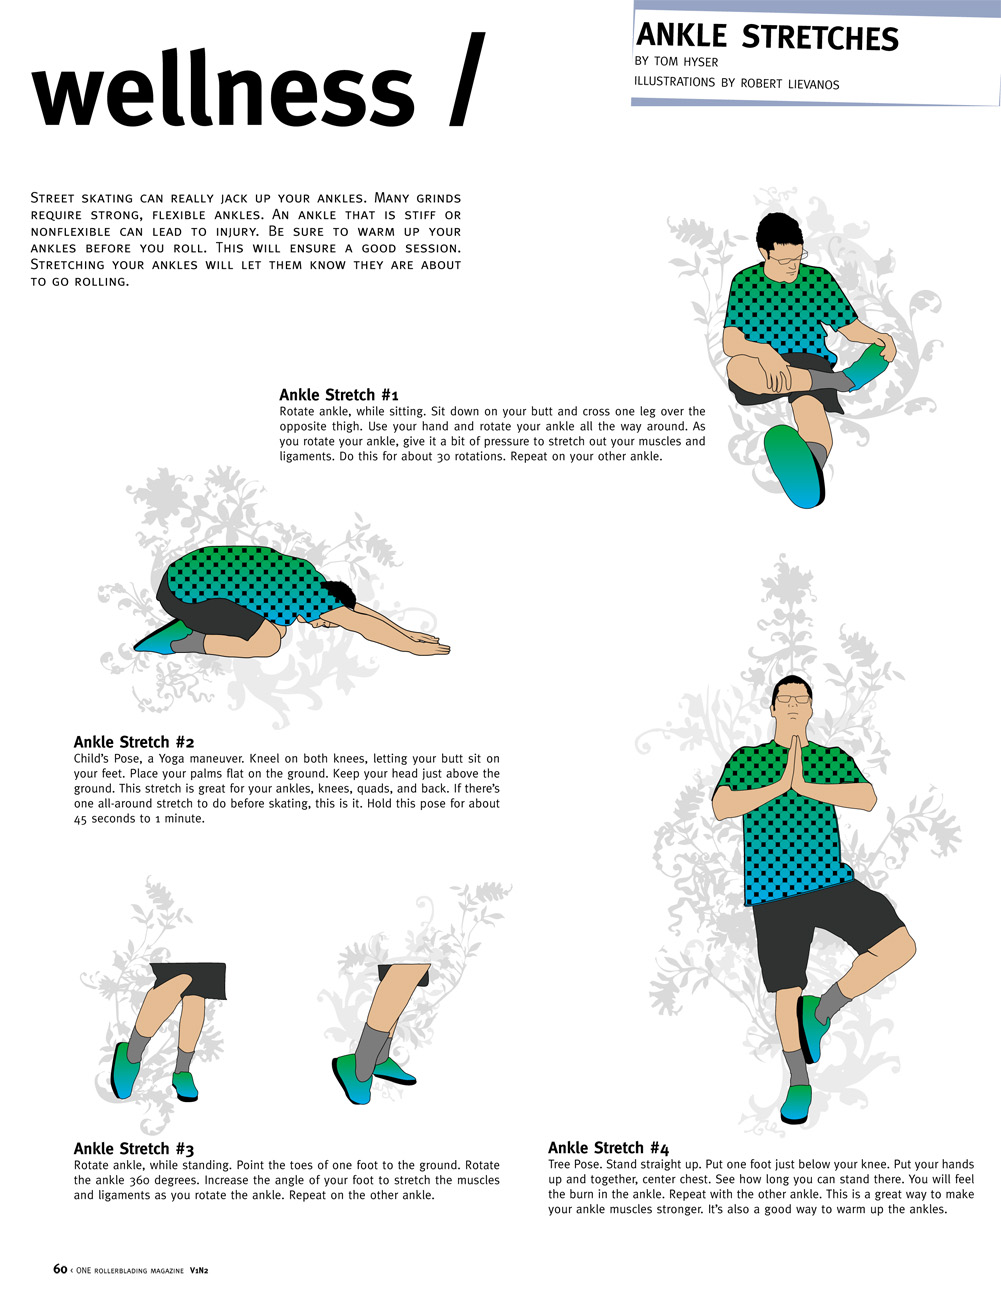 #2: Ankle Stretches